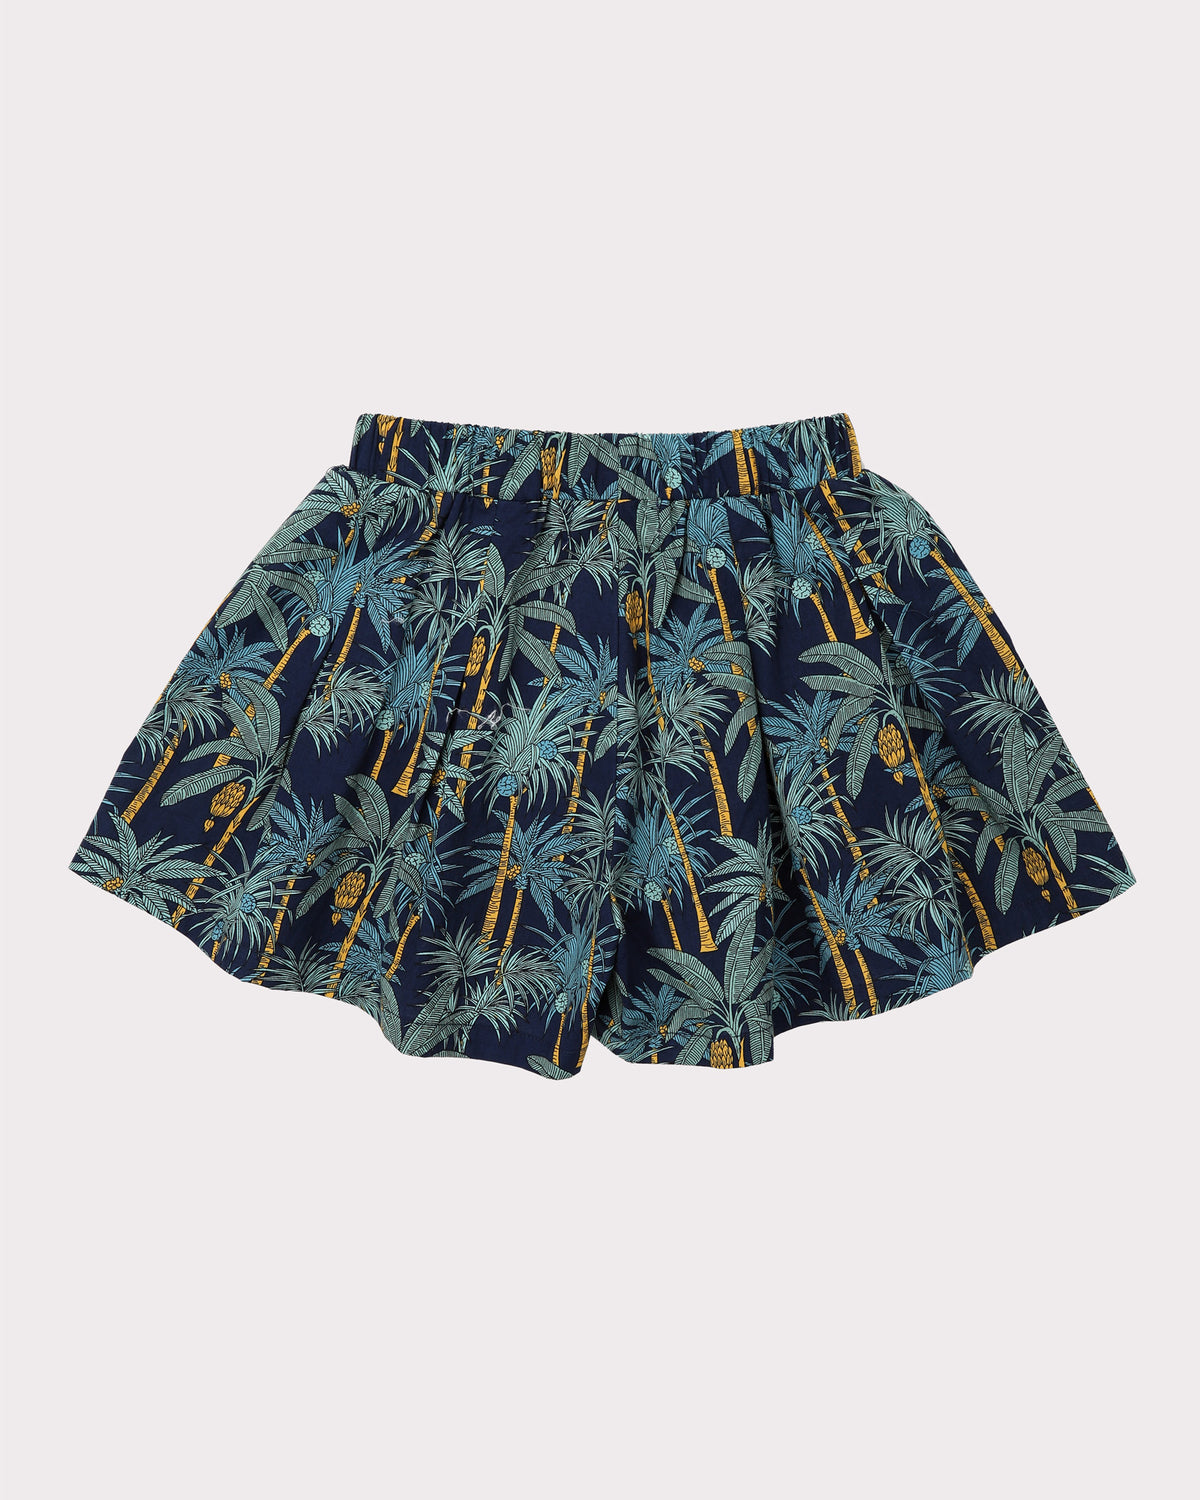 Into the Jungle Skirt In Navy Back